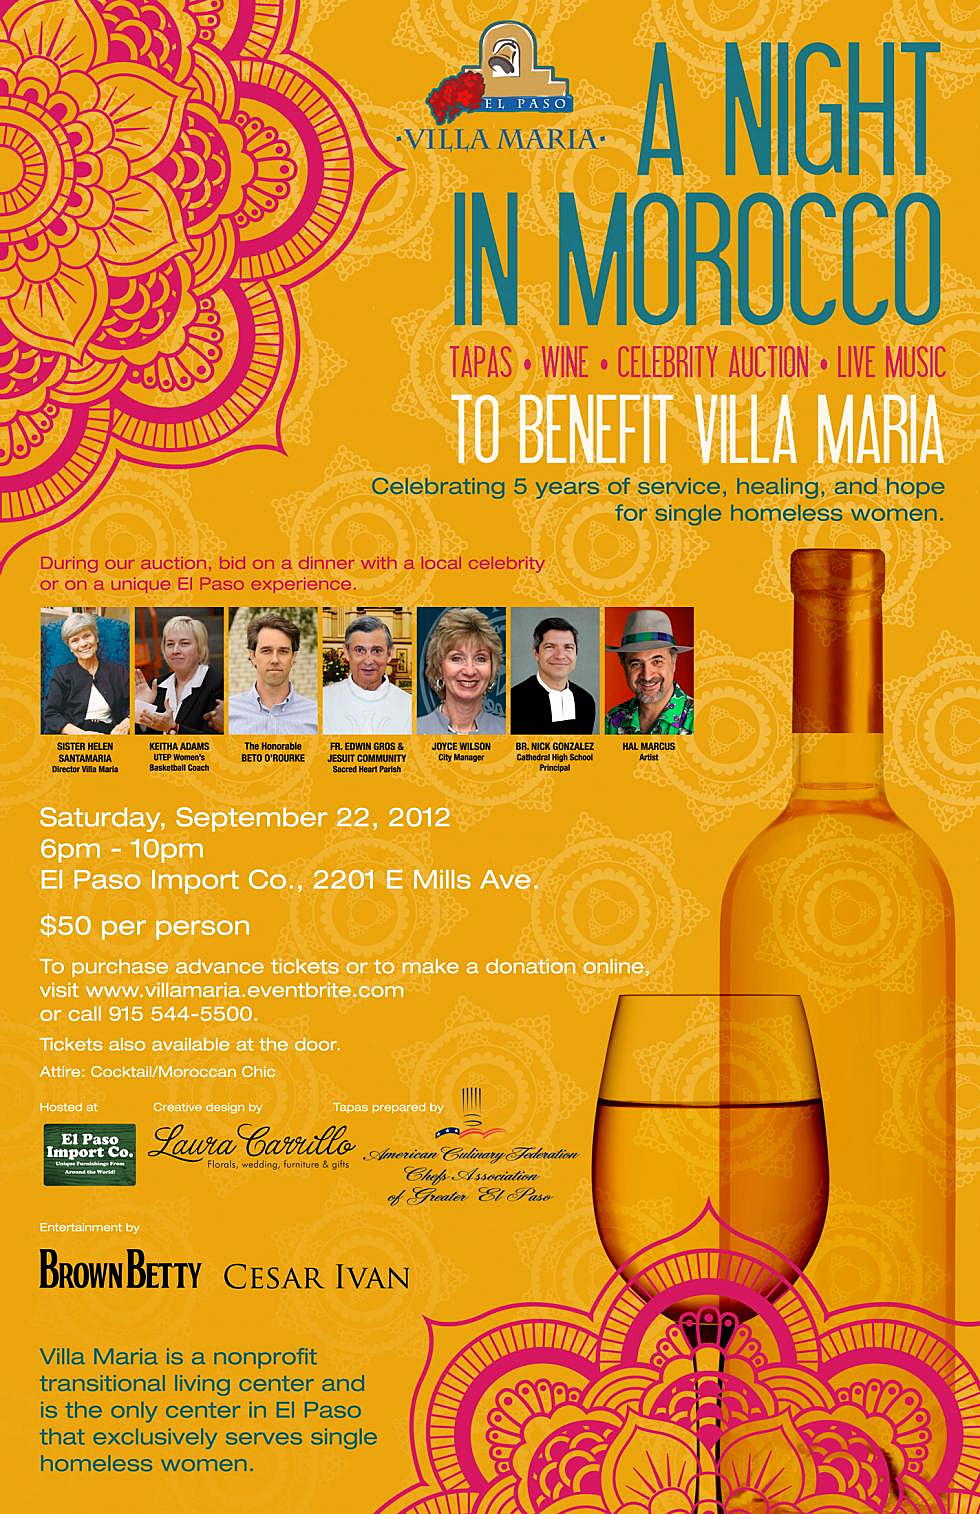 A Night In Morocco Tomorrow In El Paso! Don’t Miss This Great Event!